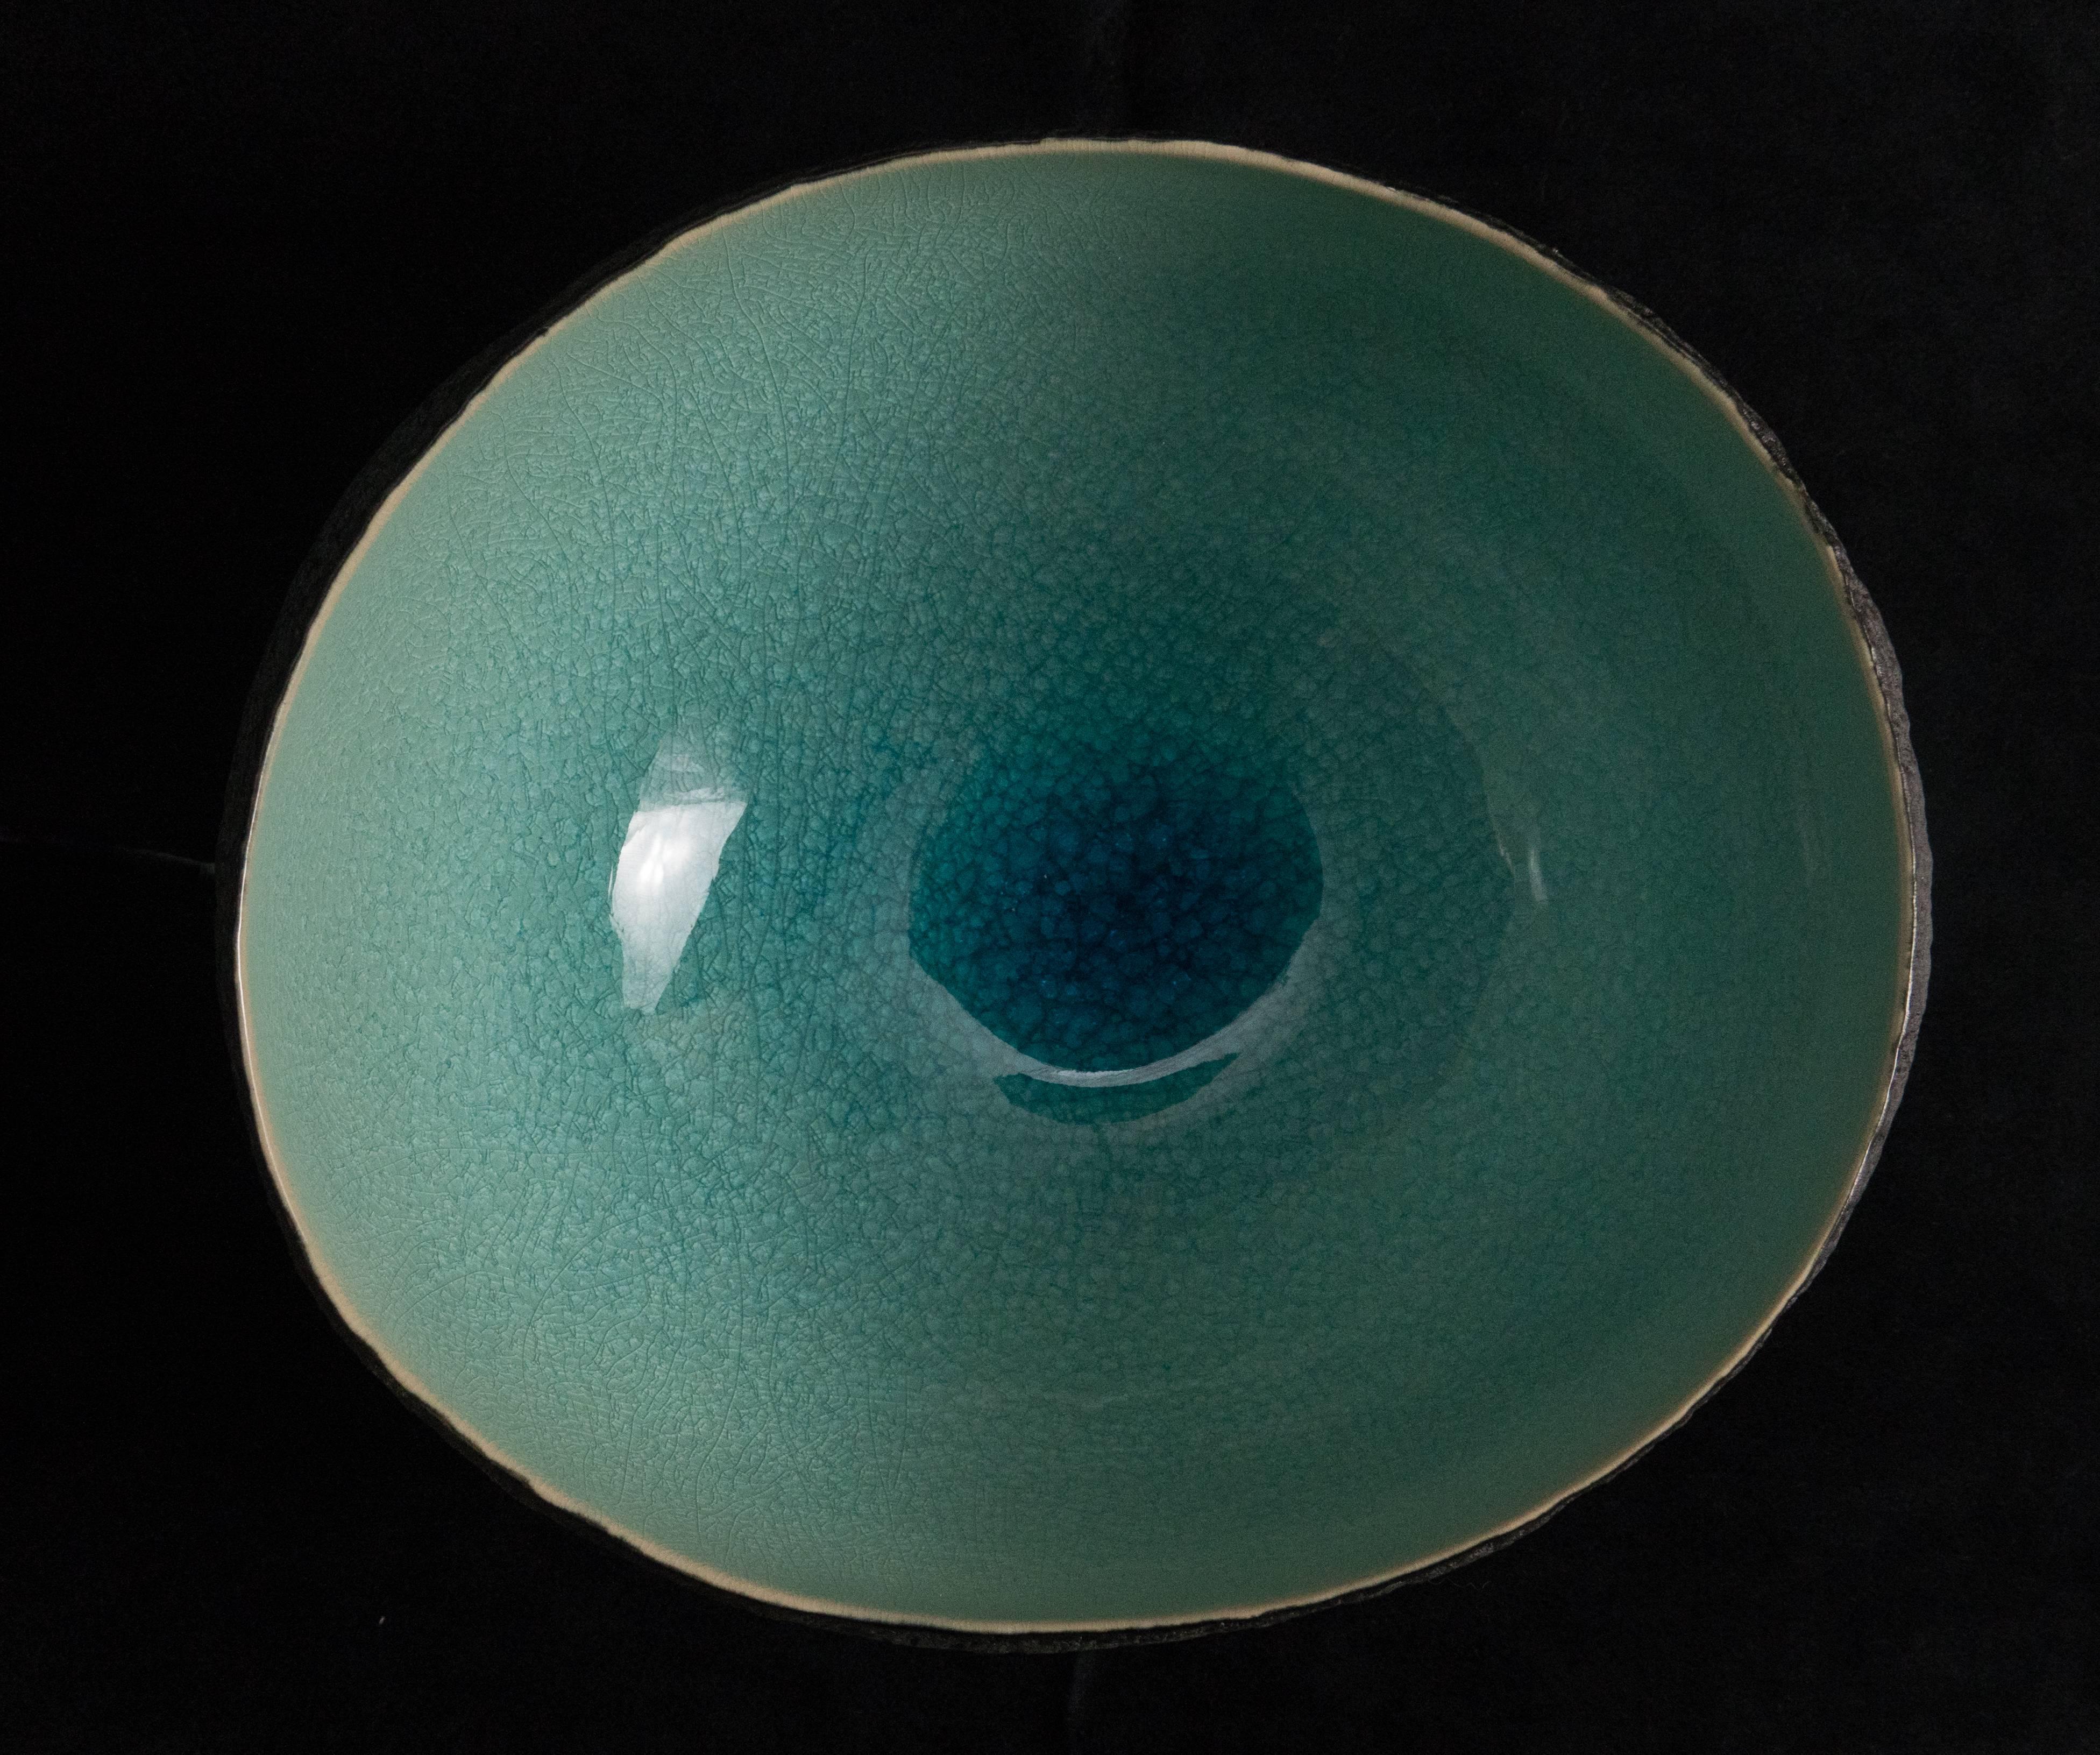 This medium size nearly round vessel was created by Cristina Salusti. 

Beginning with a ball of clay, she pinches it into vessels and textures them with stone fragments. After multiple firing it was glazed and lustered. Its volcanic-like outer wall